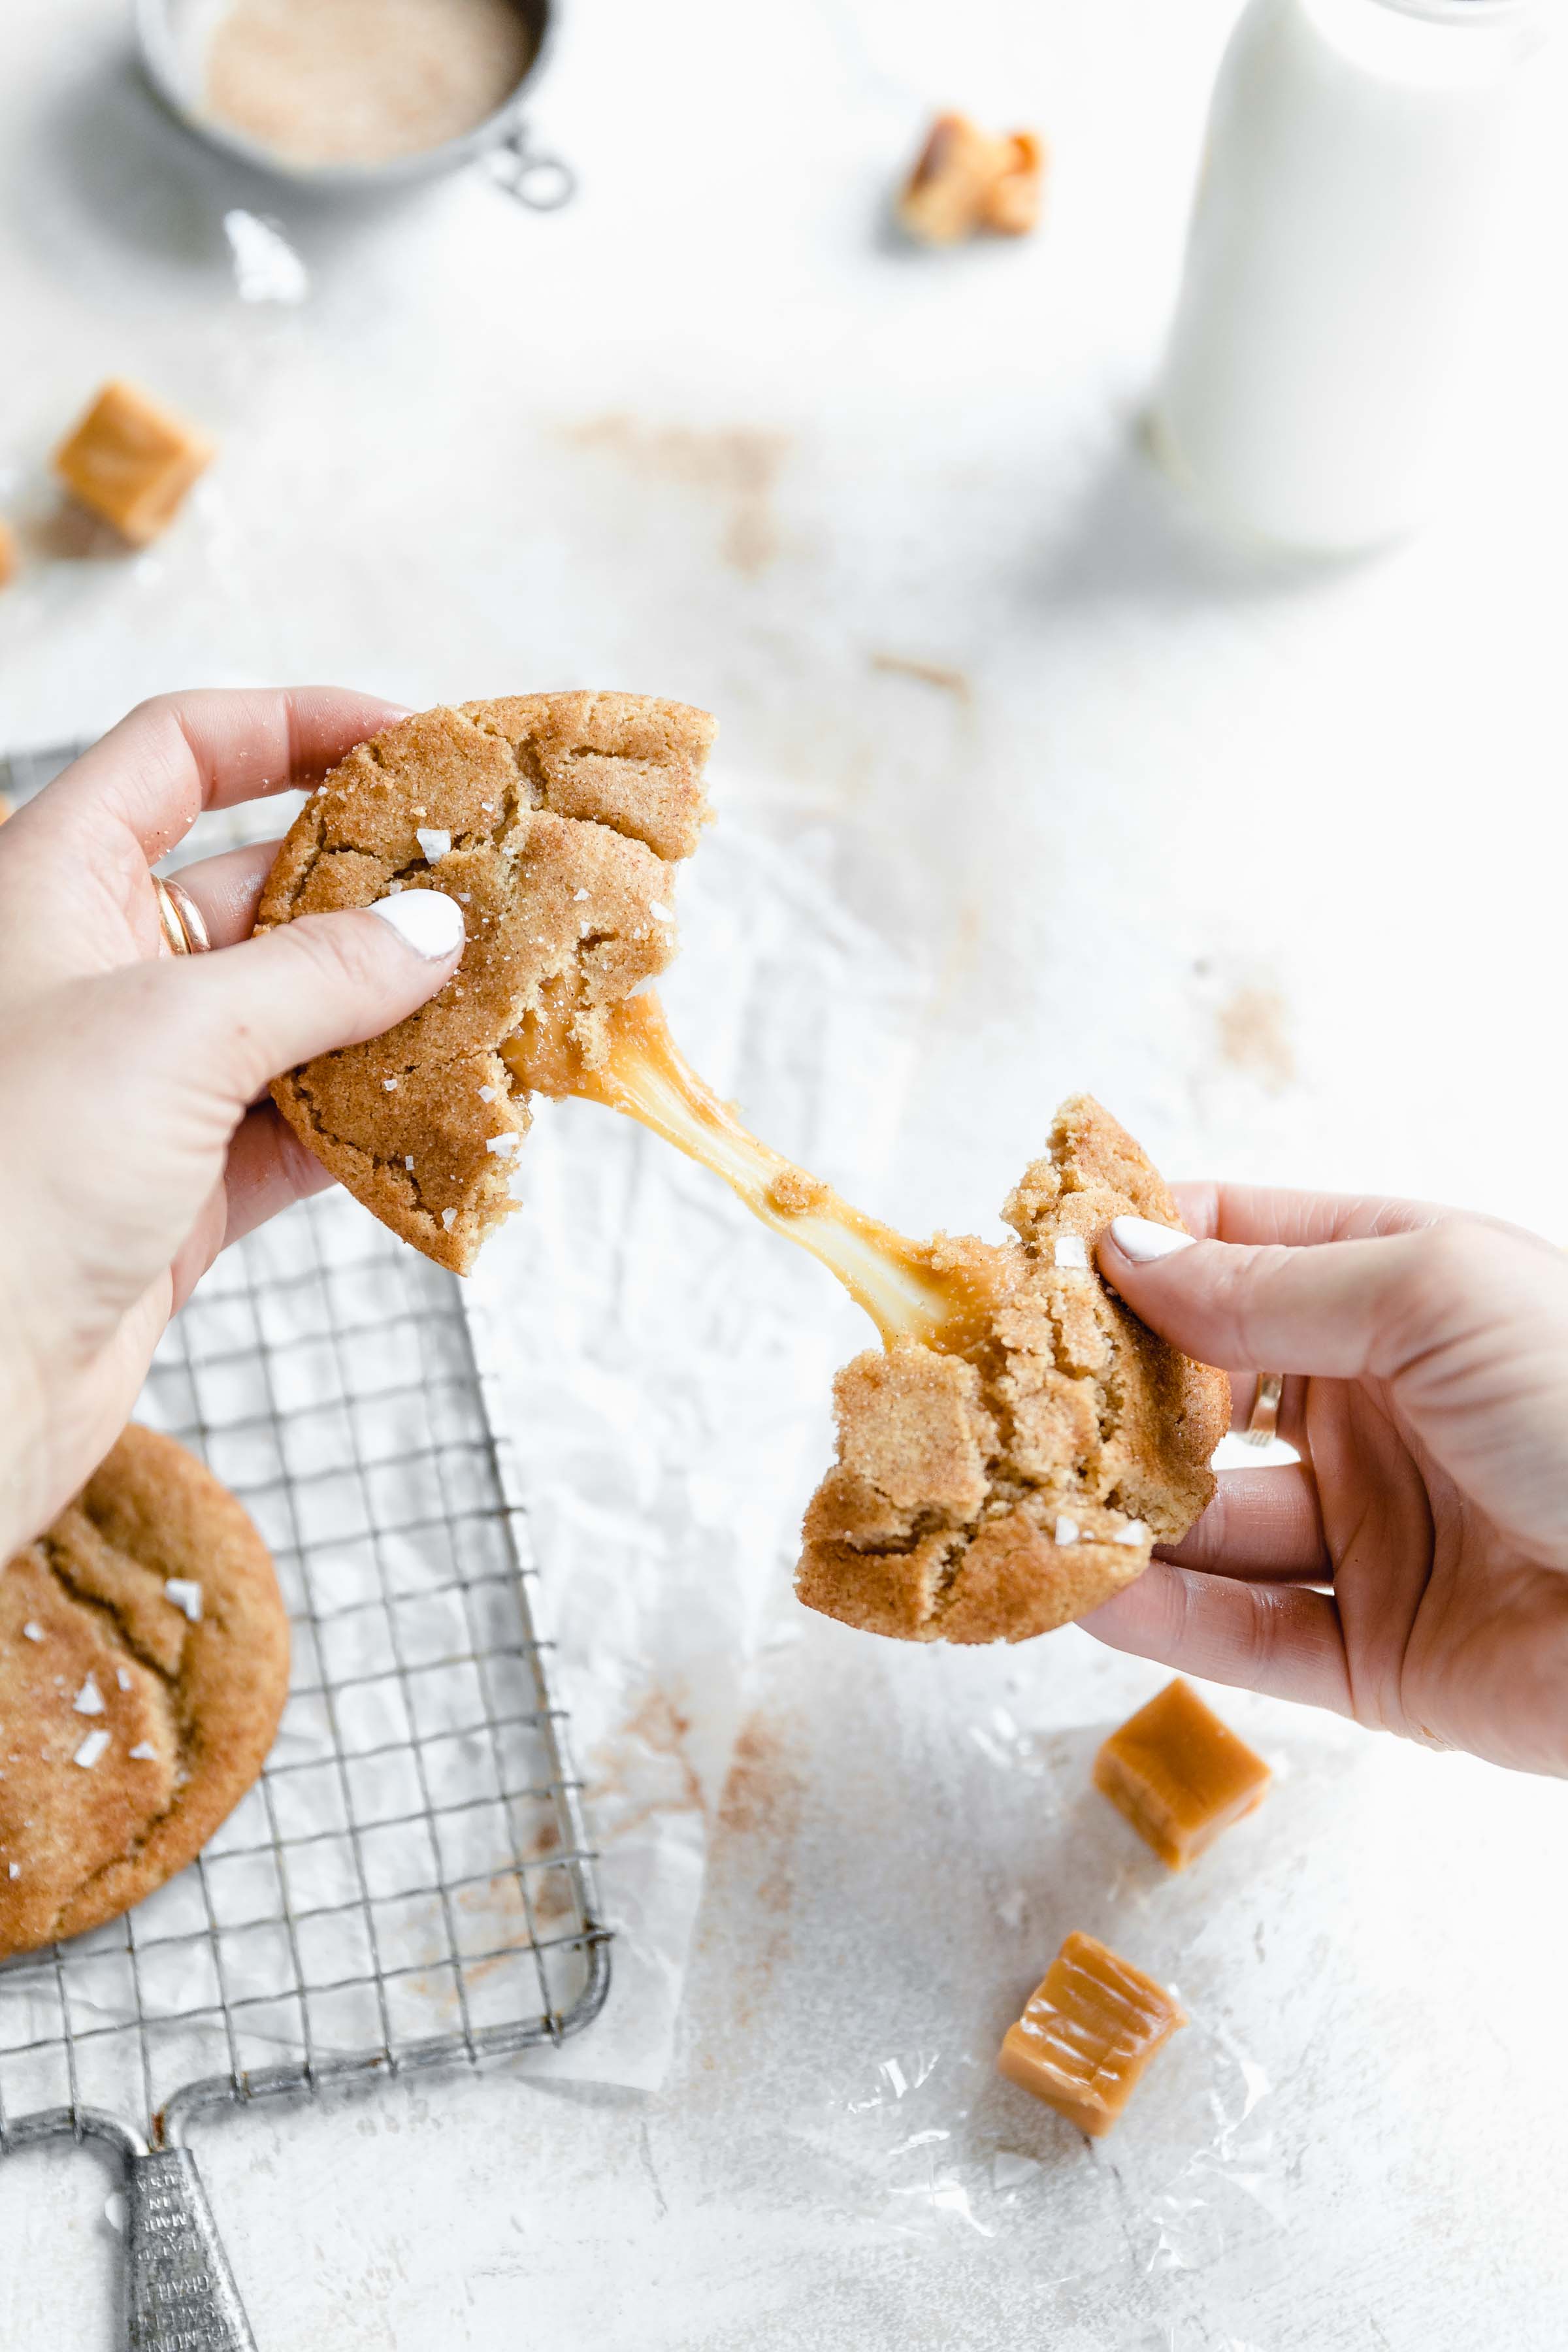 These sinfully delicious caramel stuffed snickerdoodles are our new favorite cookie